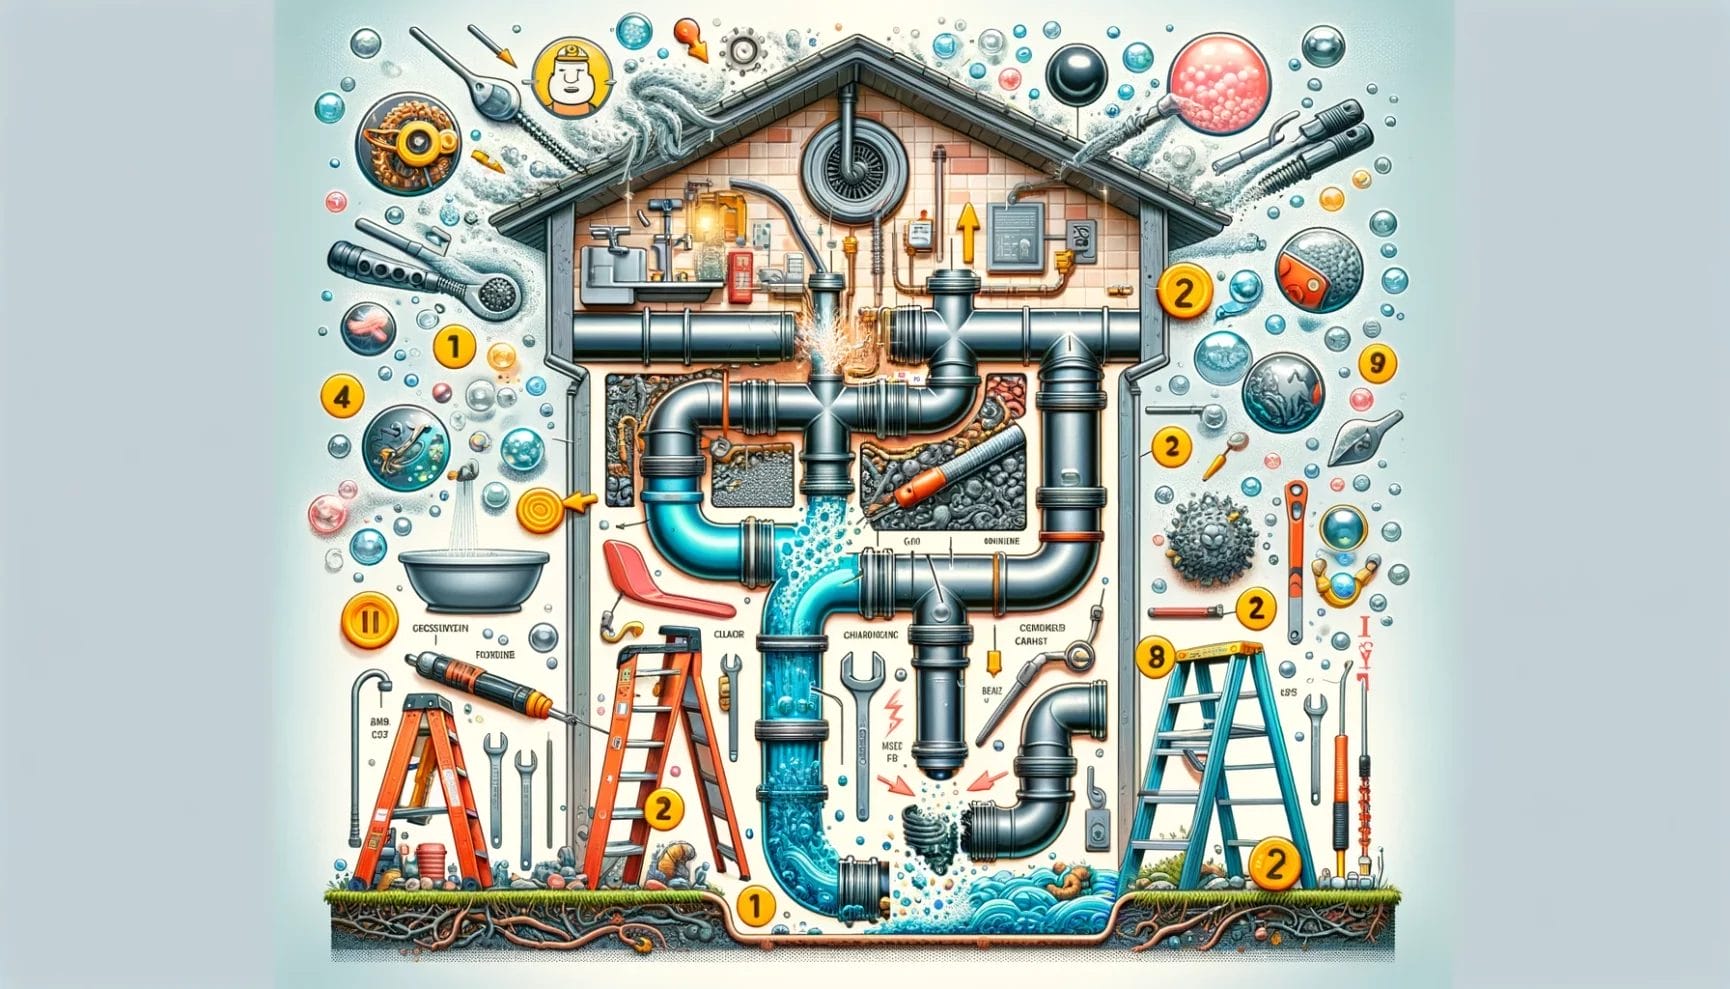 Cross-section of a stylized house with whimsical plumbing, surrounded by various scientific and cosmic elements.